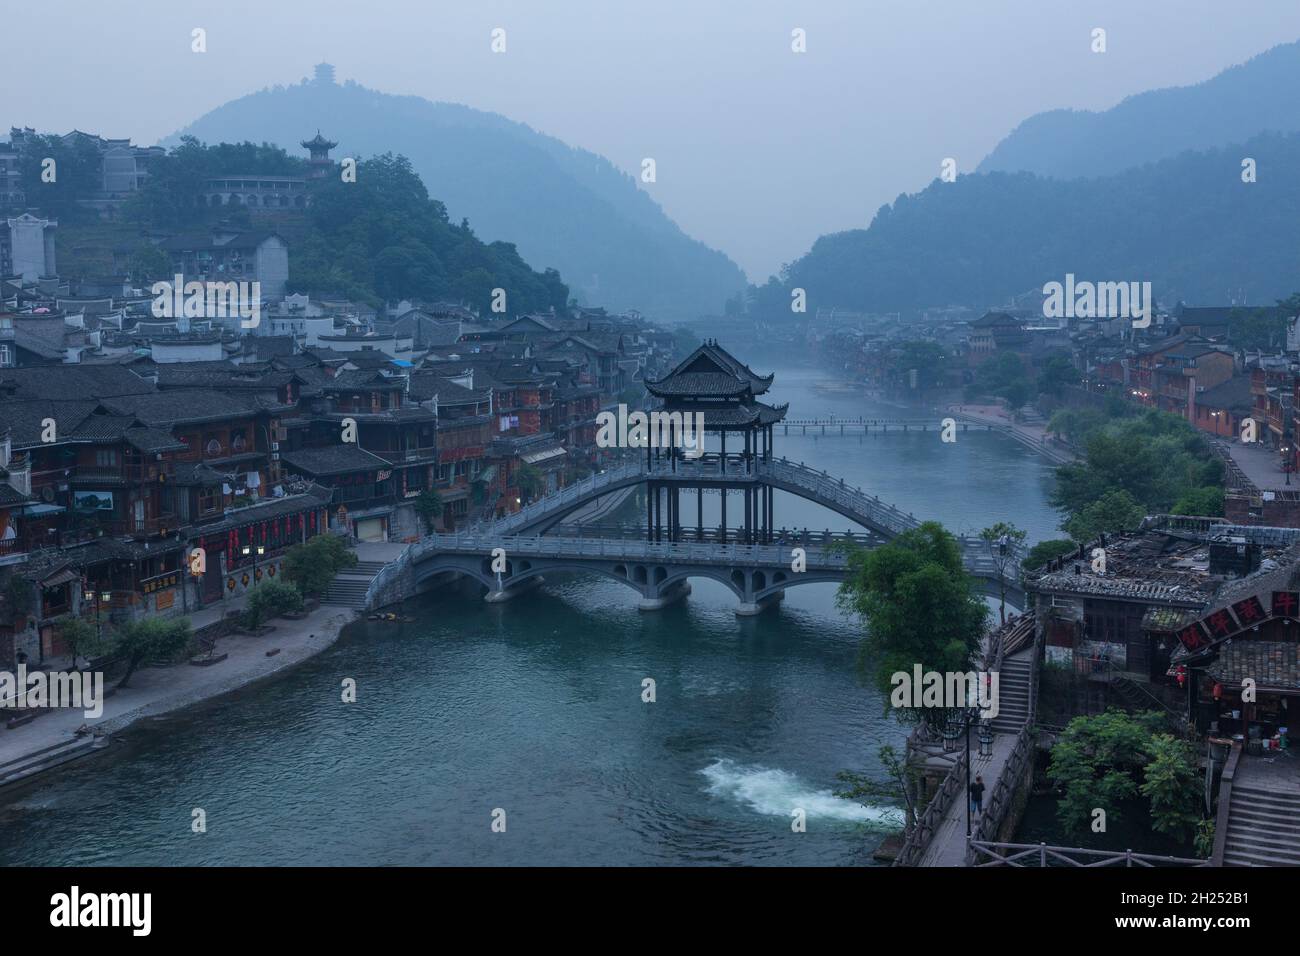 An early morning view of the Fenghuang Bridge over the Tuojiang River, Fenghuang, China. Stock Photo